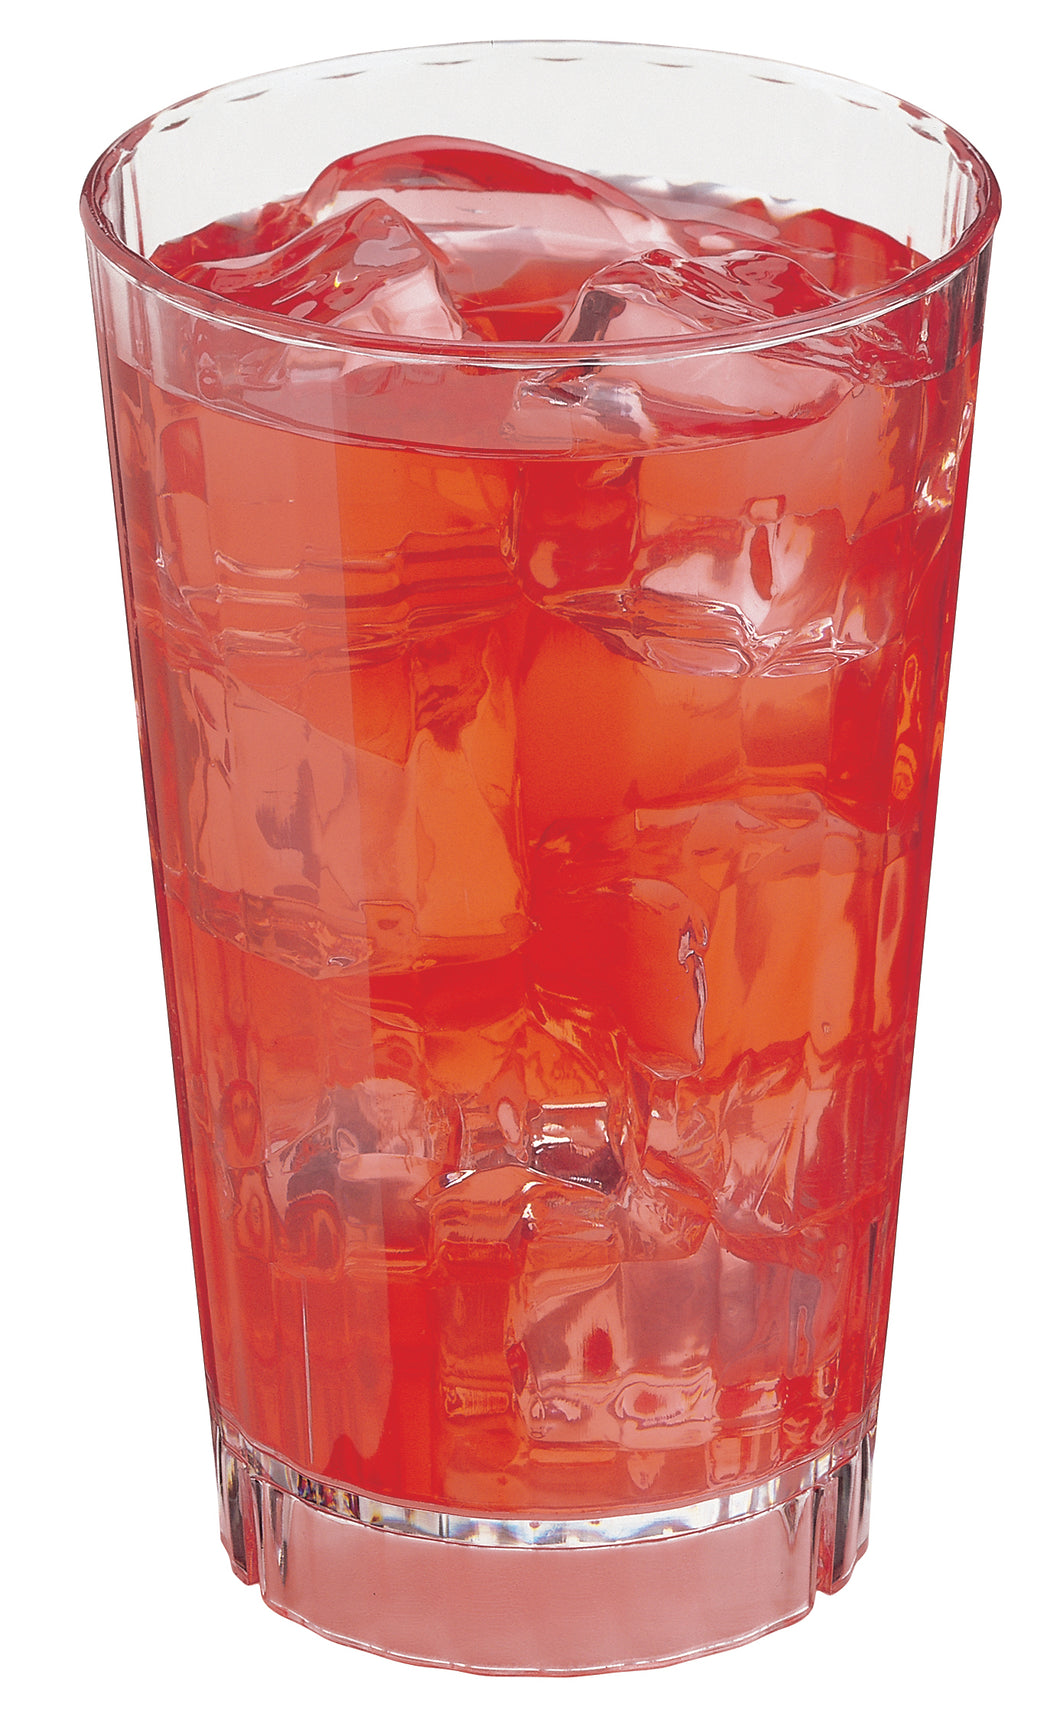 CAMBRO Huntington Polycarbonate Tumbler 296ml - 10 oz Clear. Sold in case packs of 36.